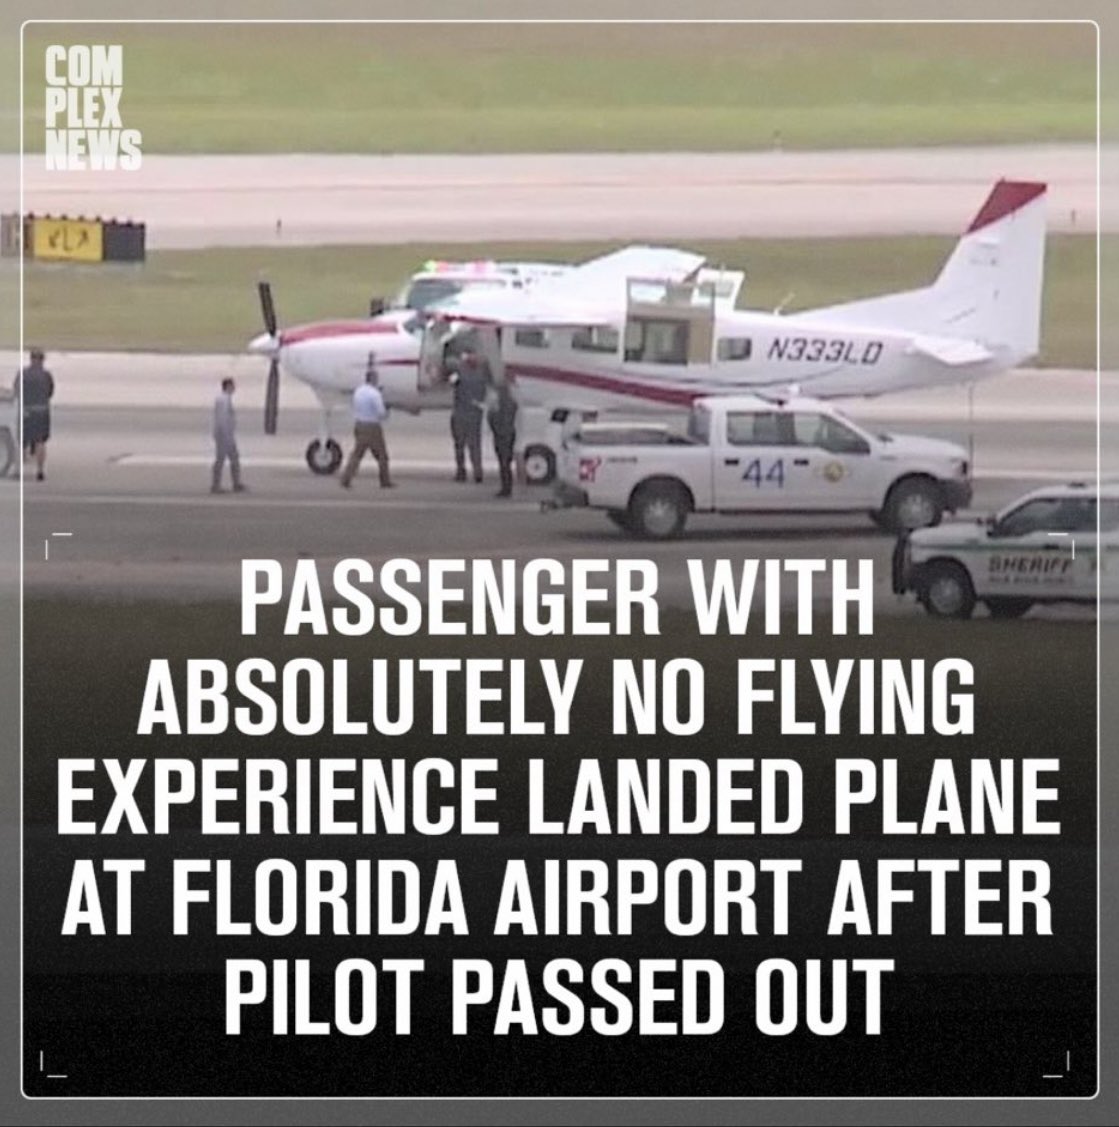 Dudes posting their wins - pizza ads - Com Plex News "44 Sheriff Passenger With Absolutely No Flying Experience Landed Plane At Florida Airport After Pilot Passed Out N333LD